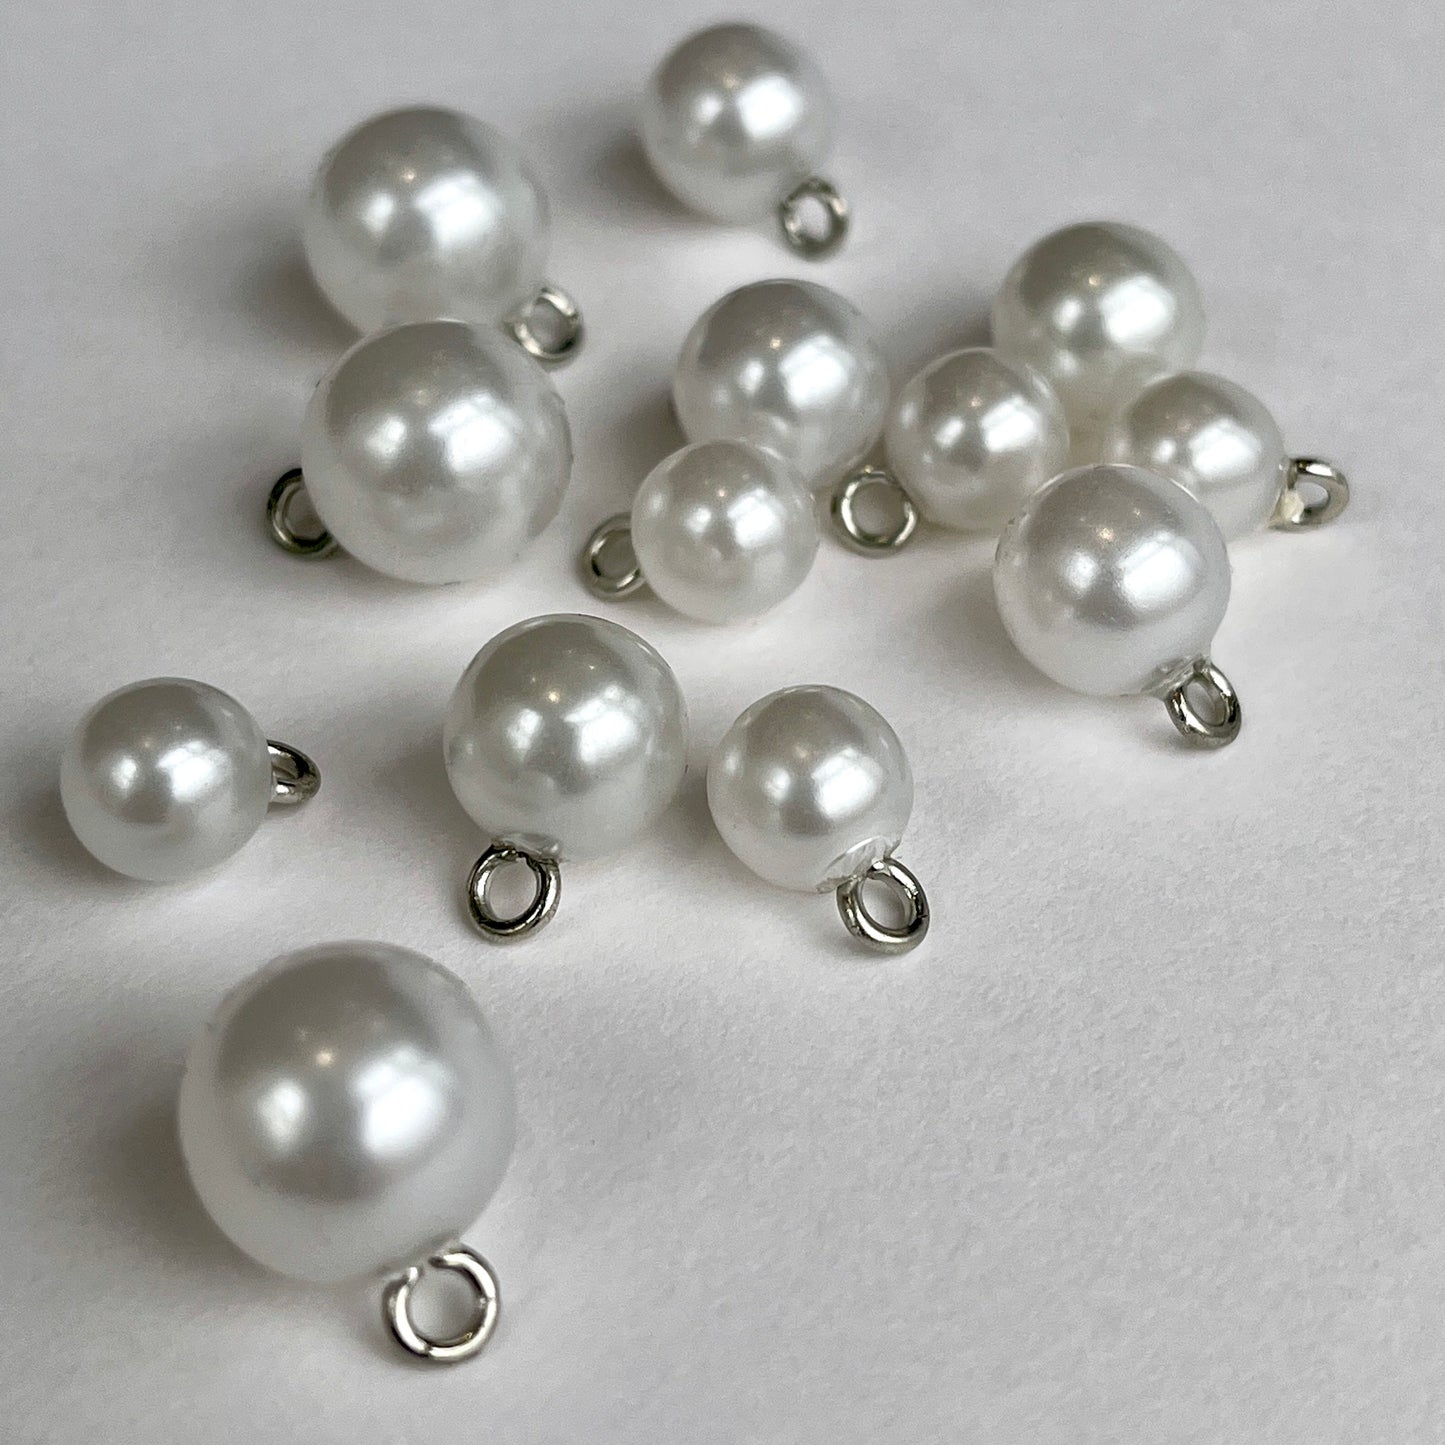 Pearl bridal ball buttons with metal shank perfect for bridal wear, baptism and Christening gowns or even a fancy cardi! Available in either white or ivory and 3 sizes.